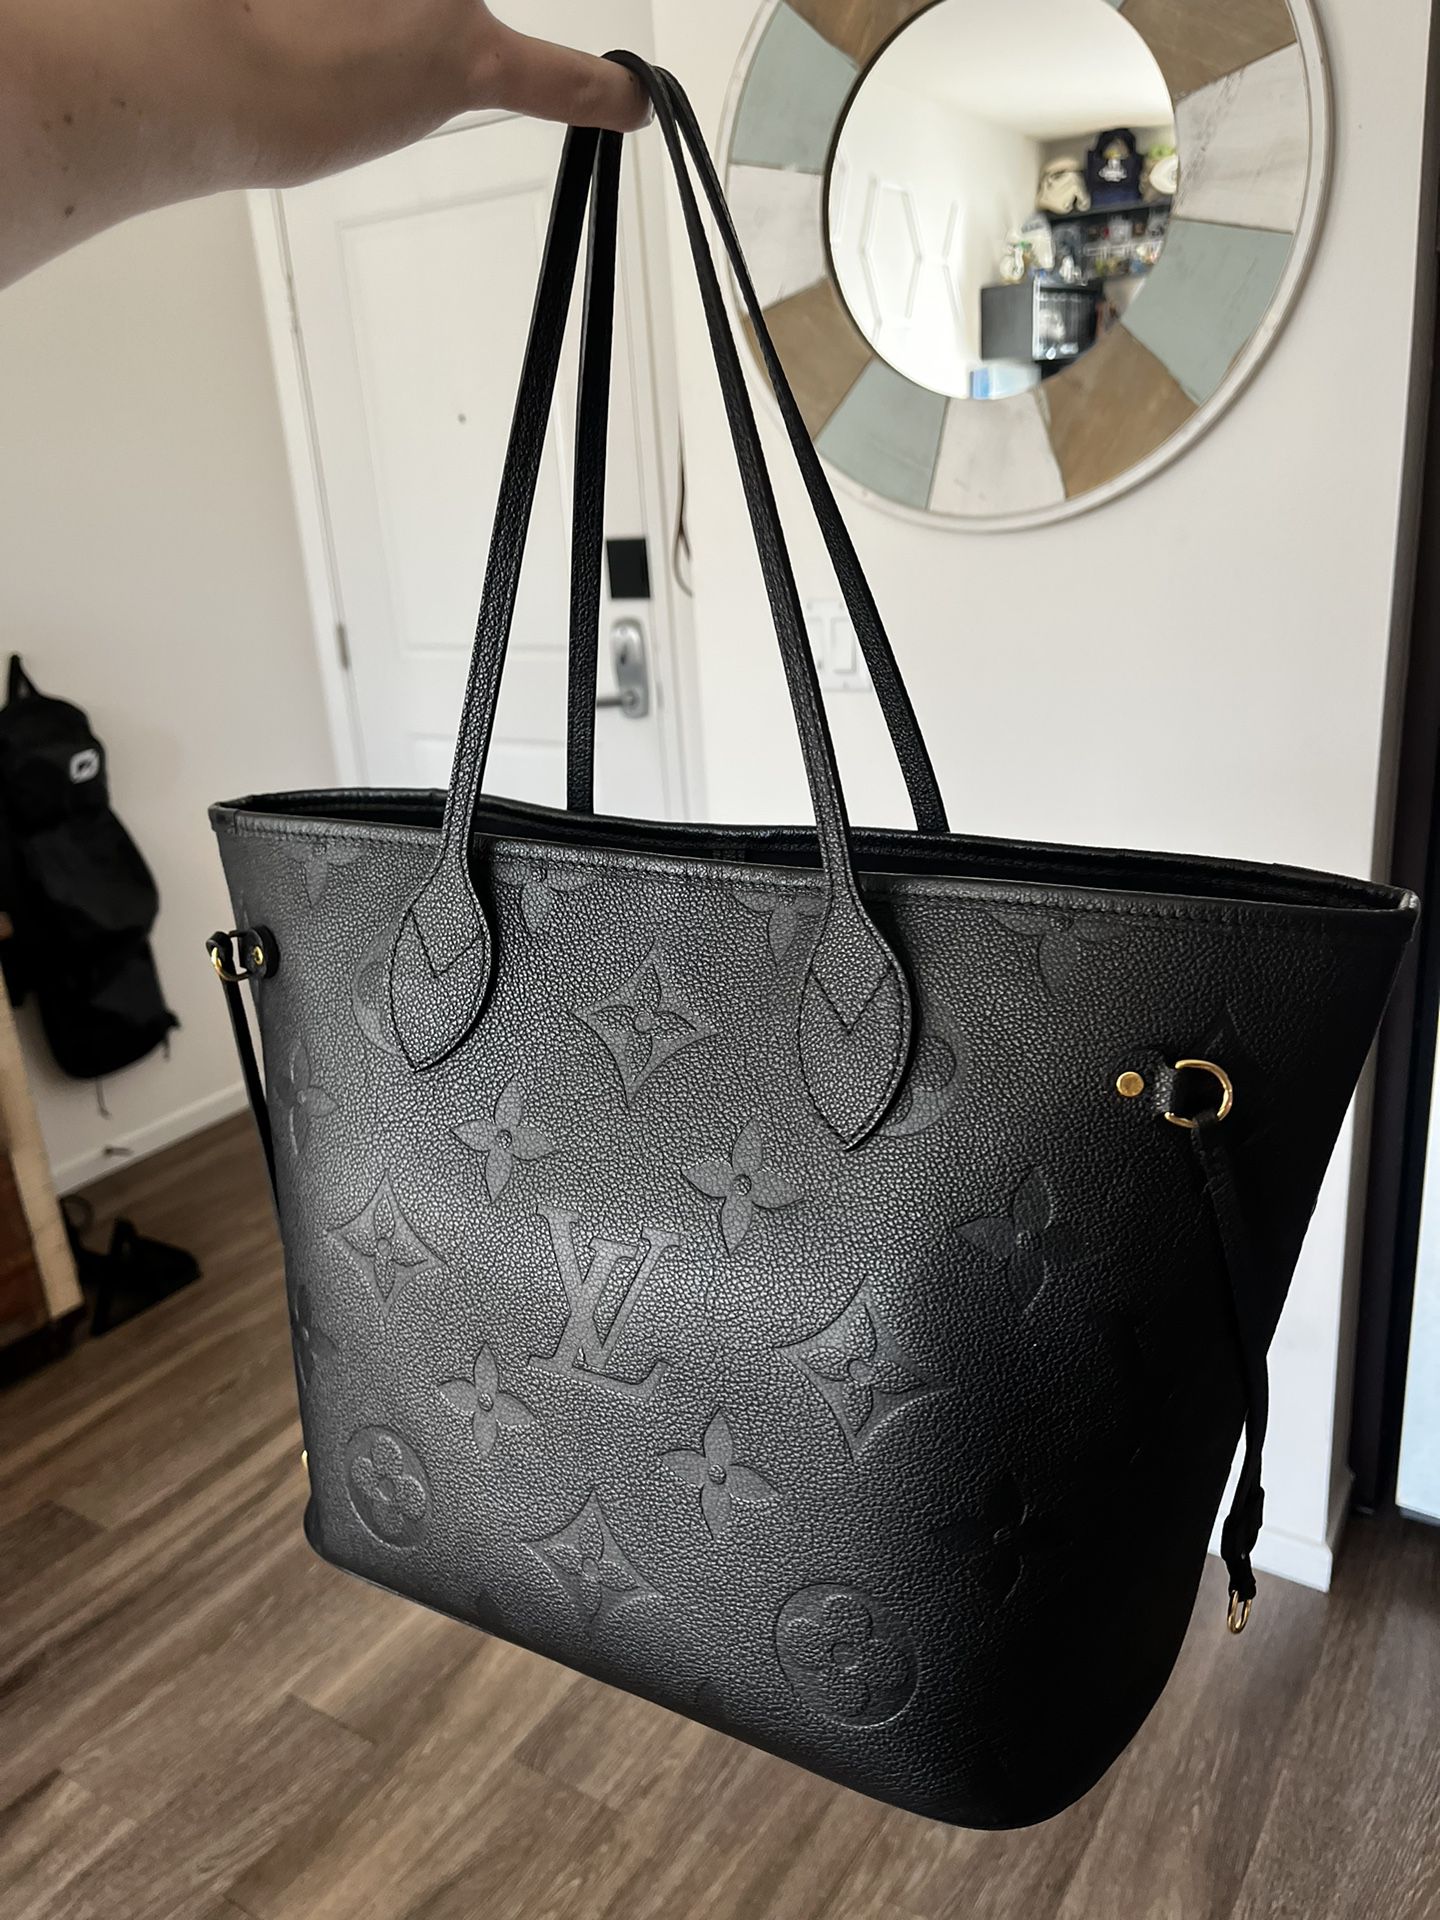 Louis Vuitton Neverfull MM tote bag for Sale in Menlo Park, CA - OfferUp